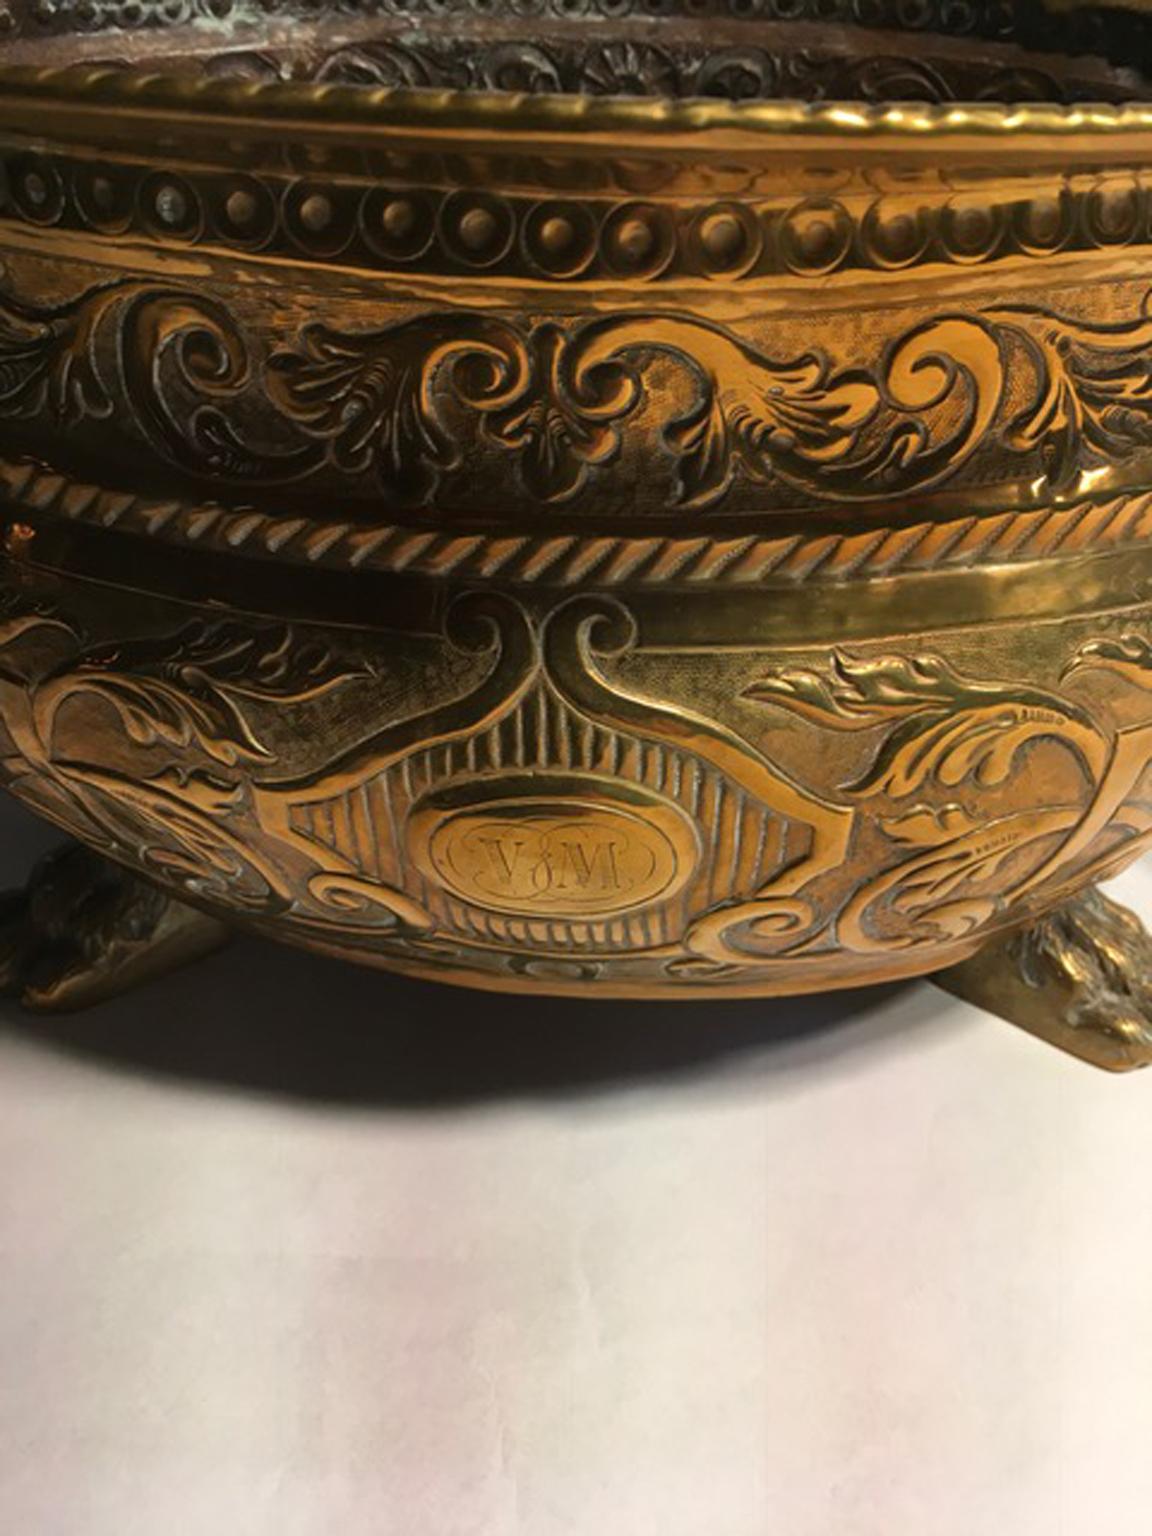 Italy burnished brass planter bowl with lions Heads, early 20th century

This is an antique brass jardiniere with a lot of charm. Two lion's head are the handles.

Don't put water inside directly.
With certificate of authenticity.